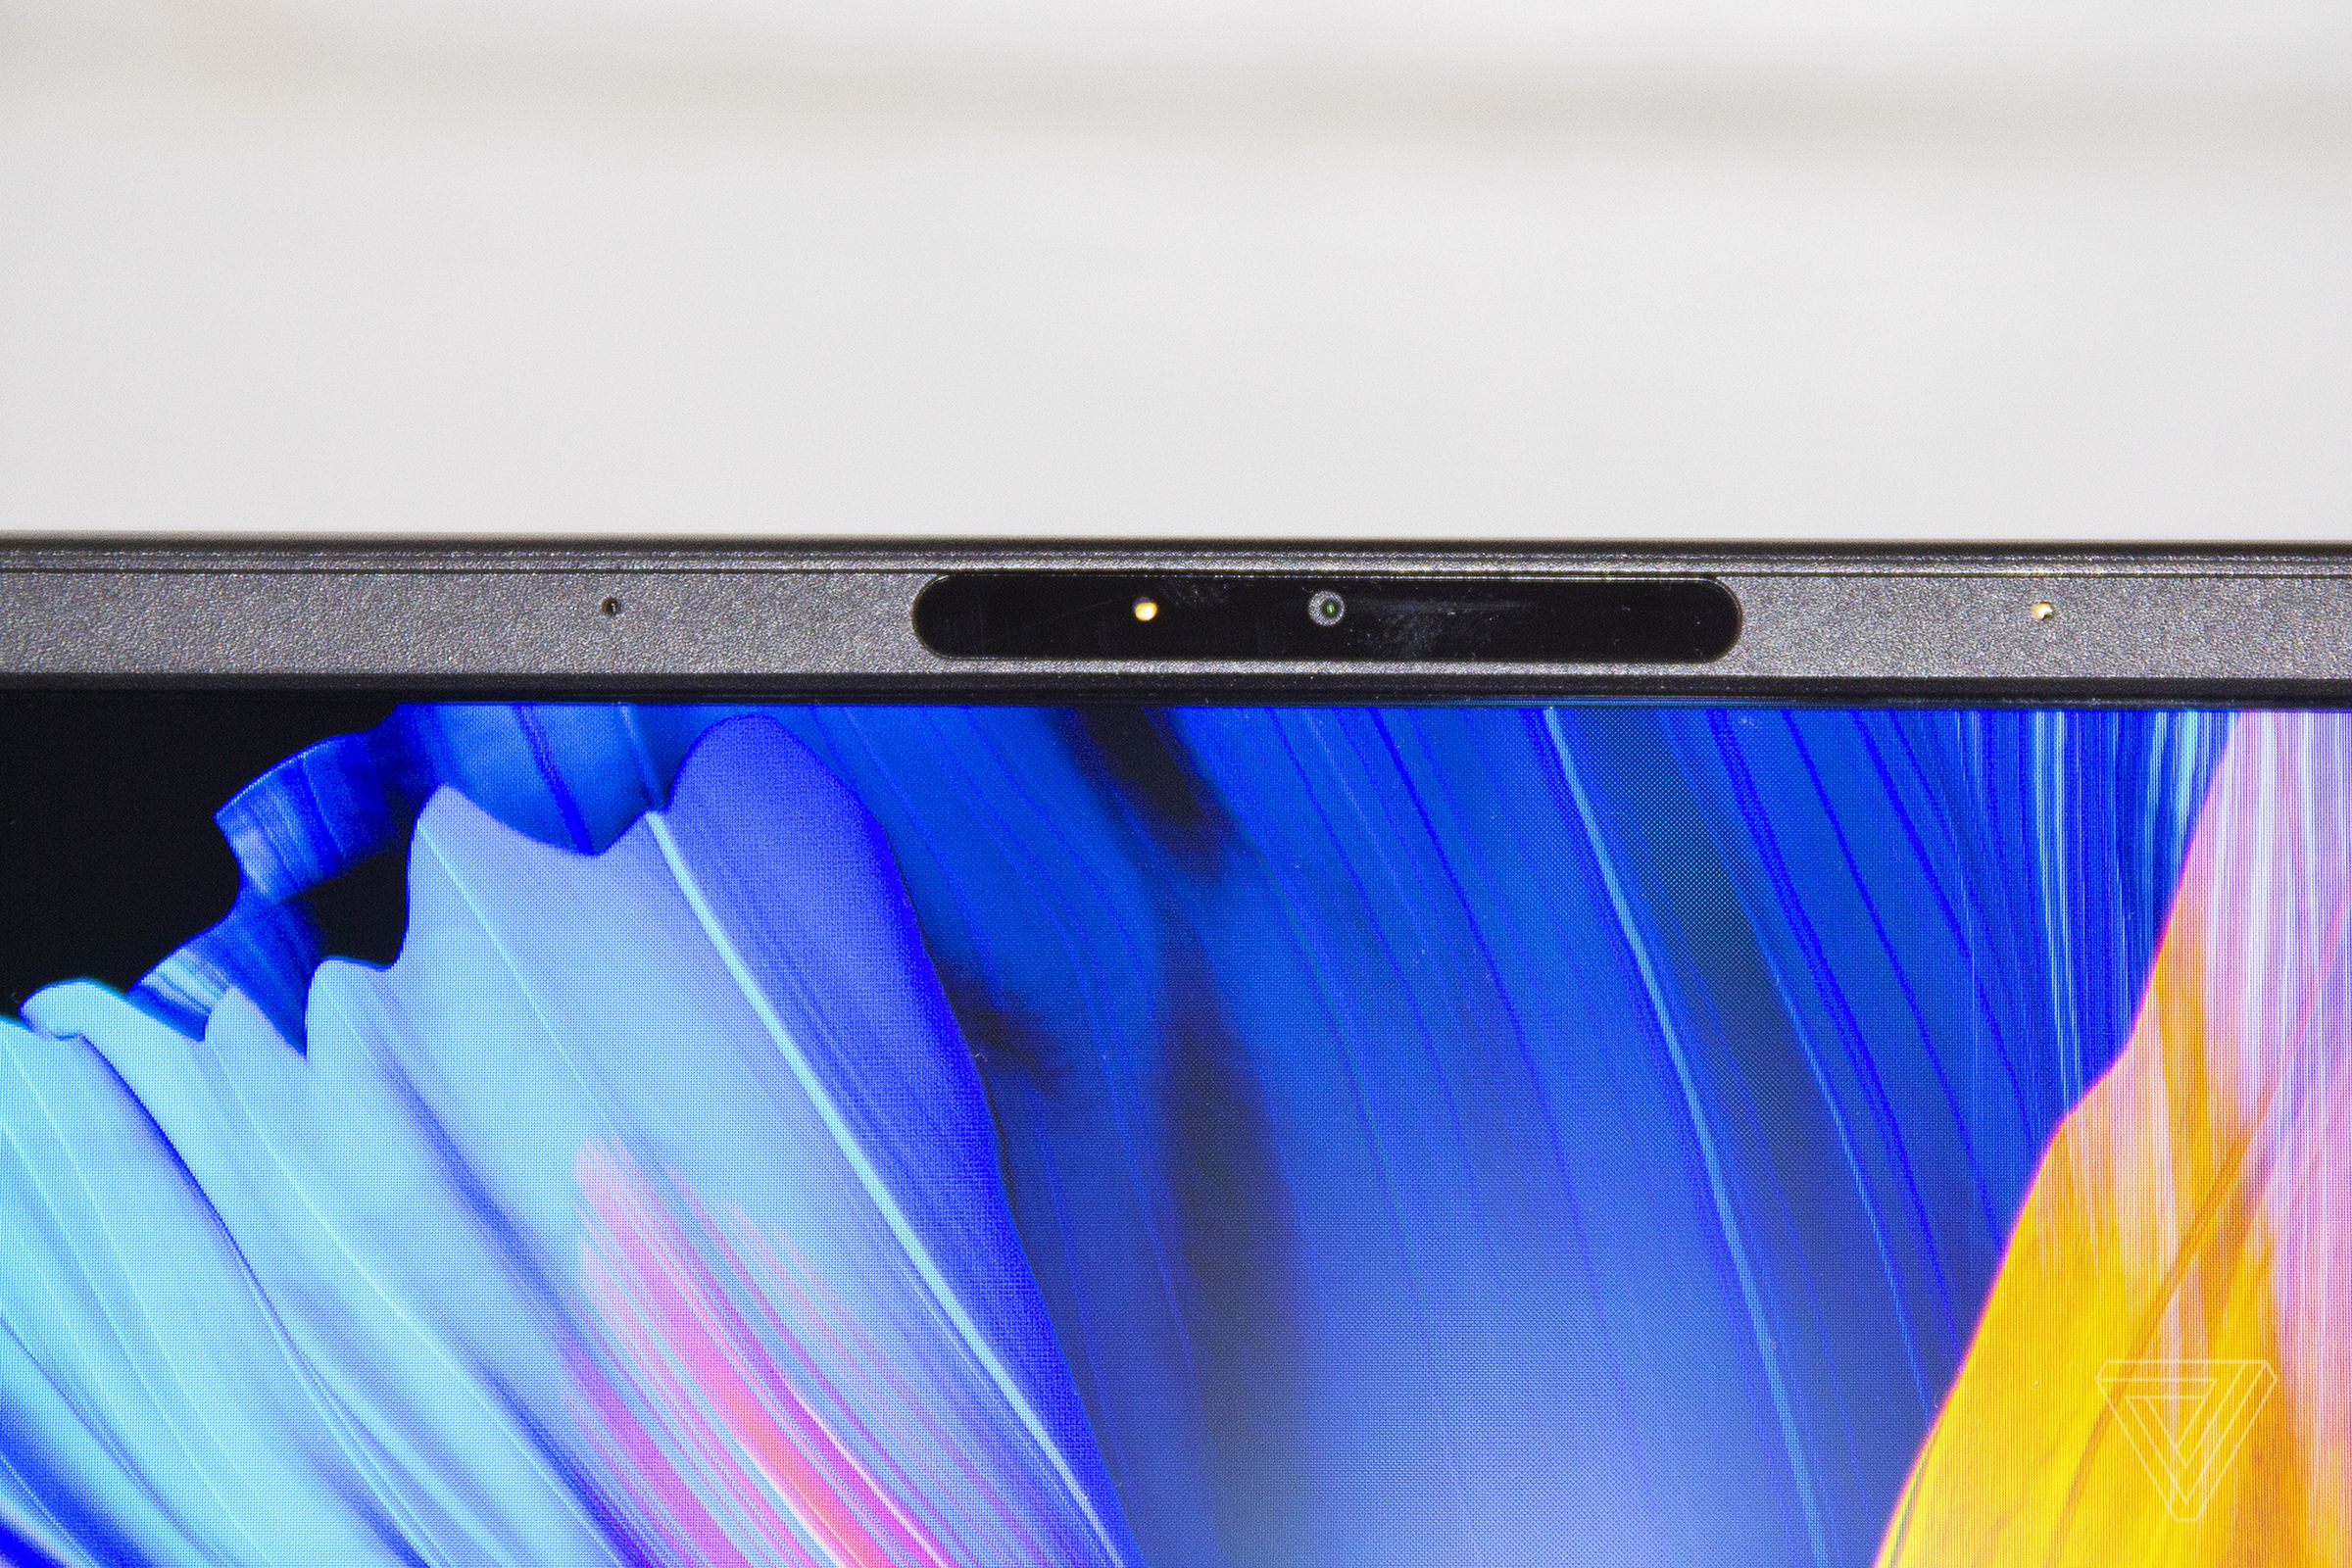 The webcam on the Asus Zenbook 13 OLED.